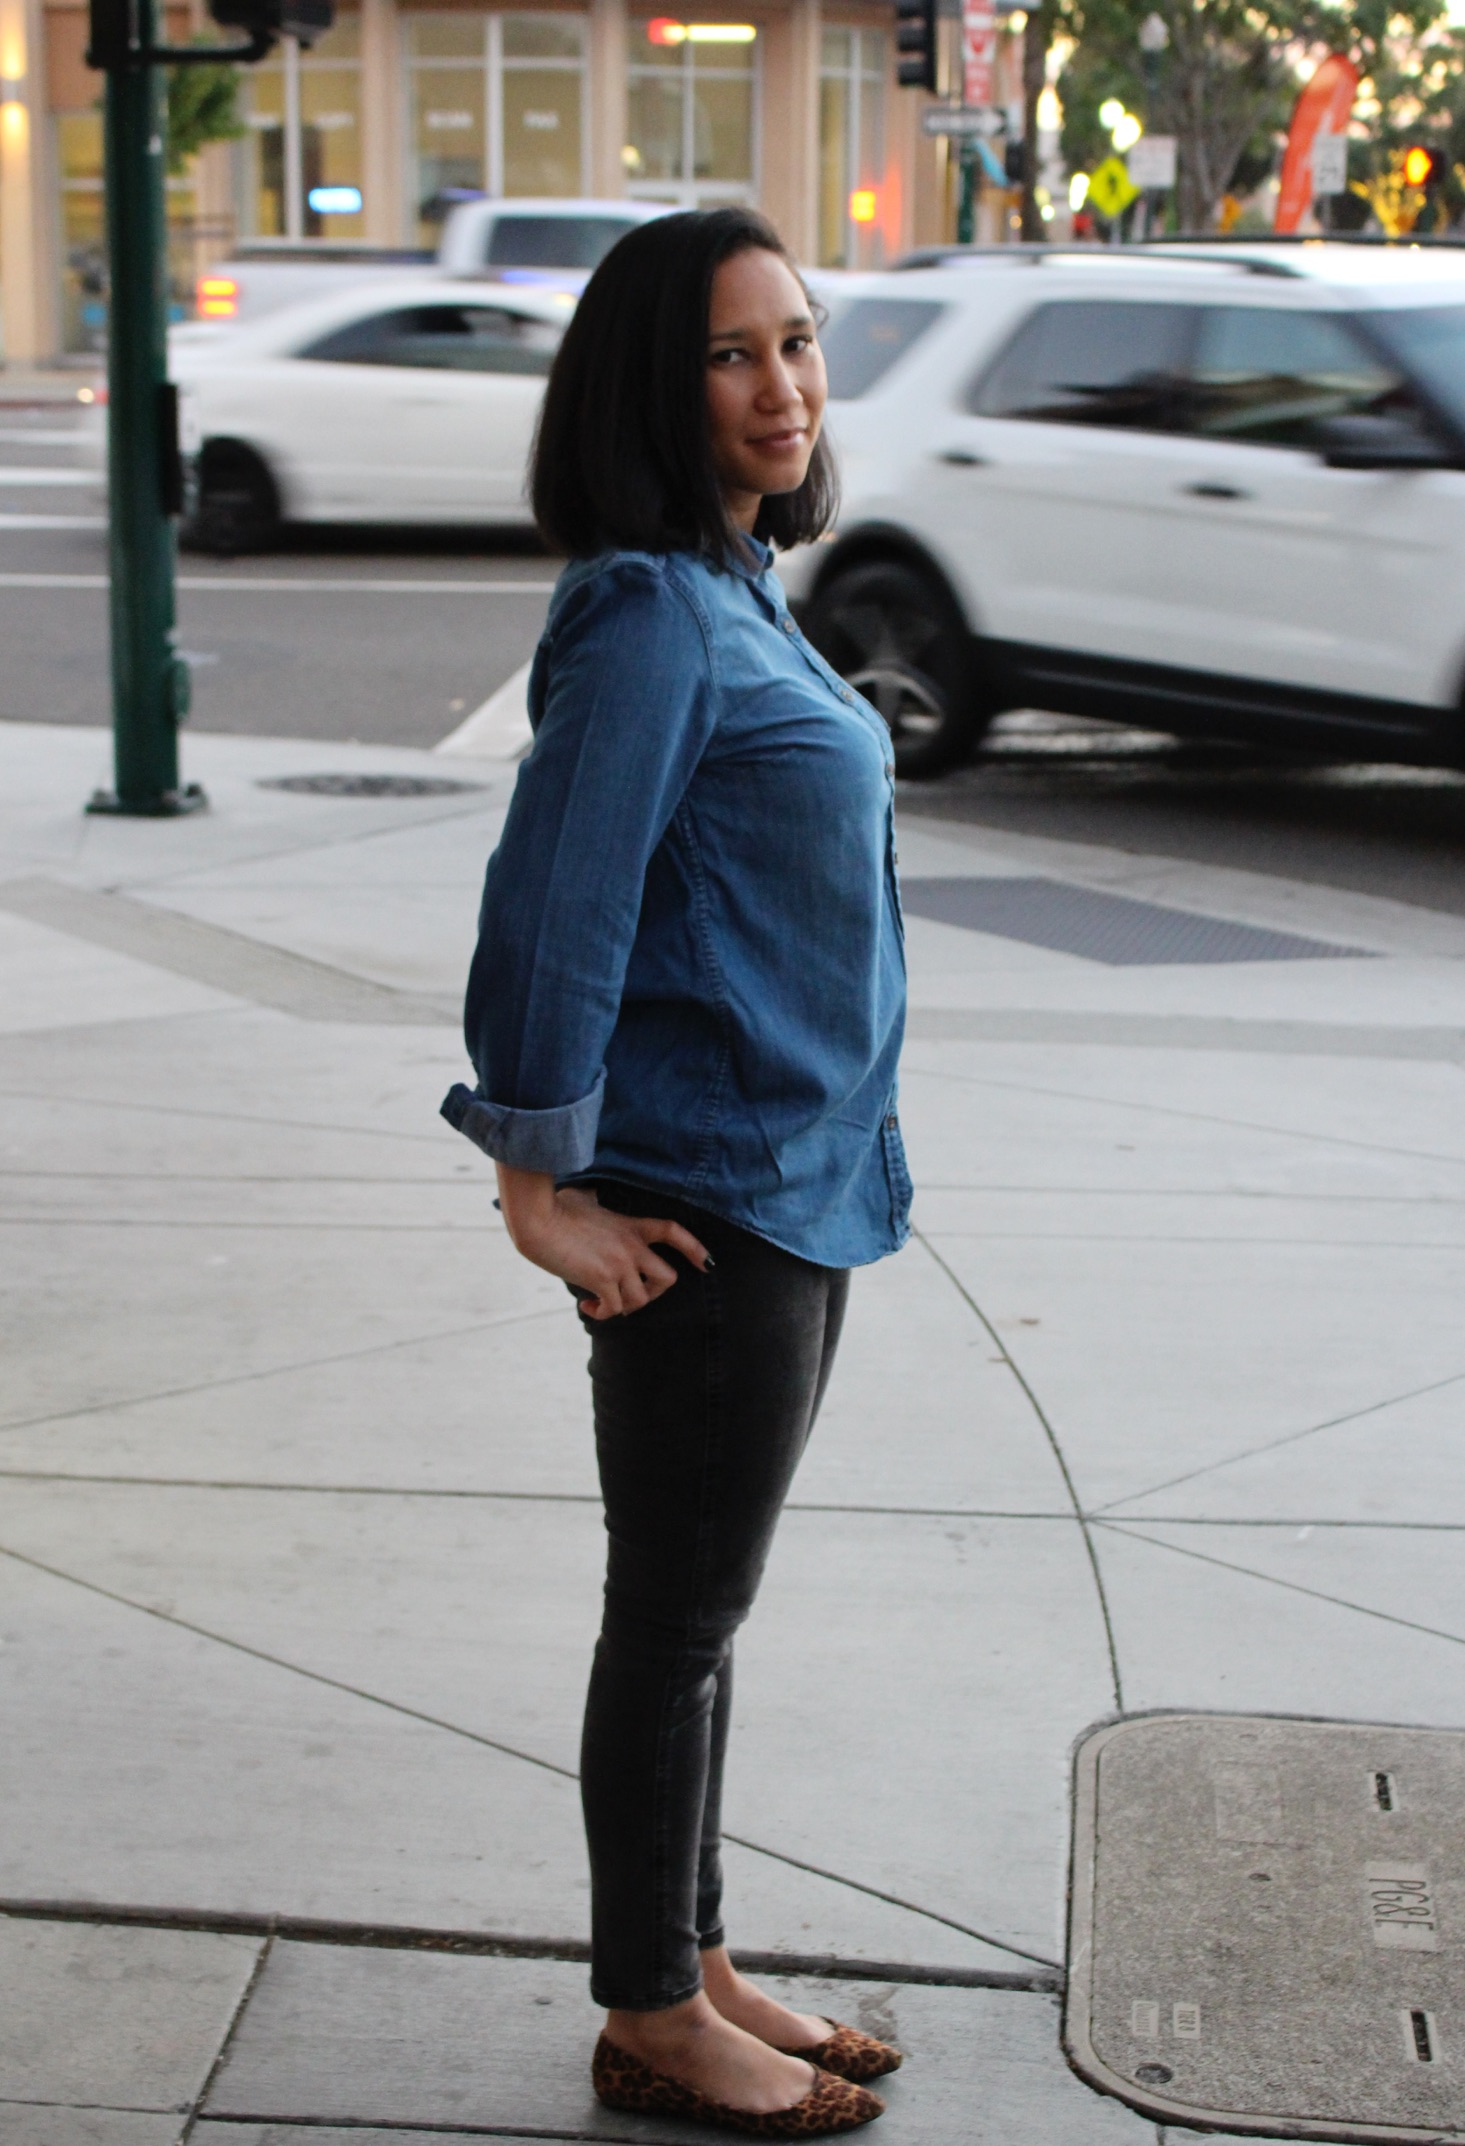 What color leggings should I wear with a denim shirt? - Quora